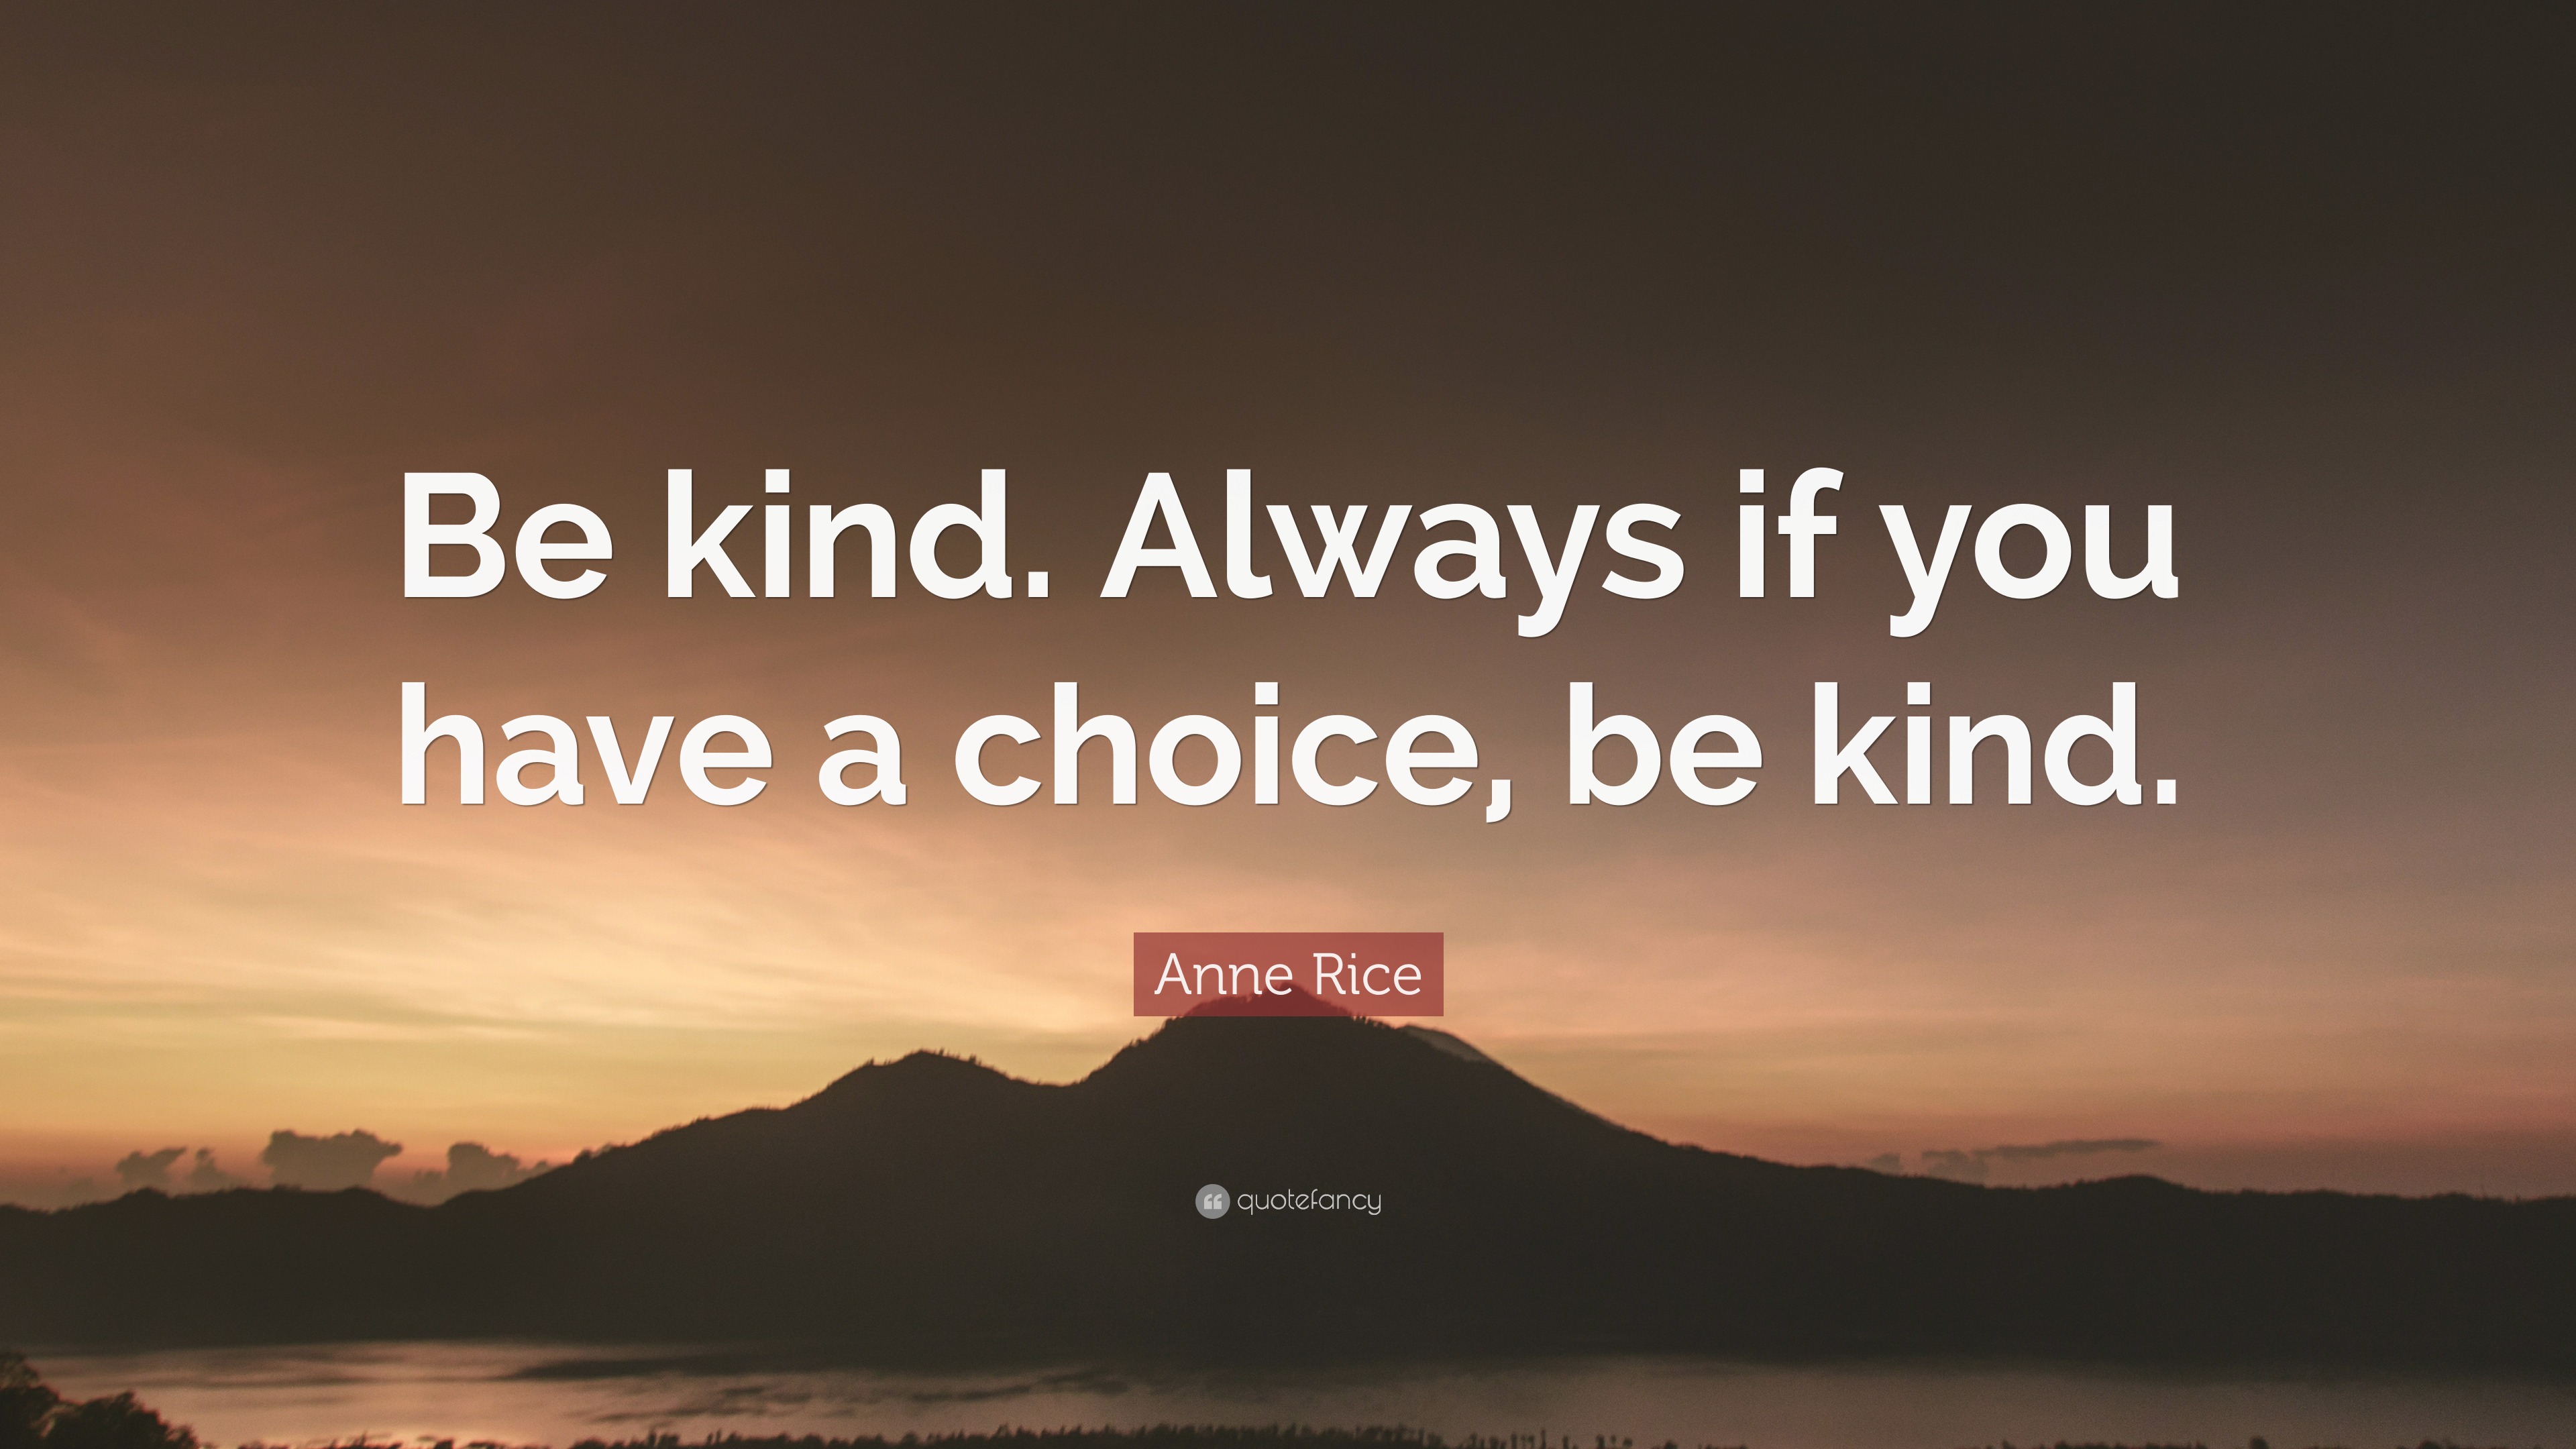 Anne Rice Quote: “Be kind. Always if you have a choice, be kind.”